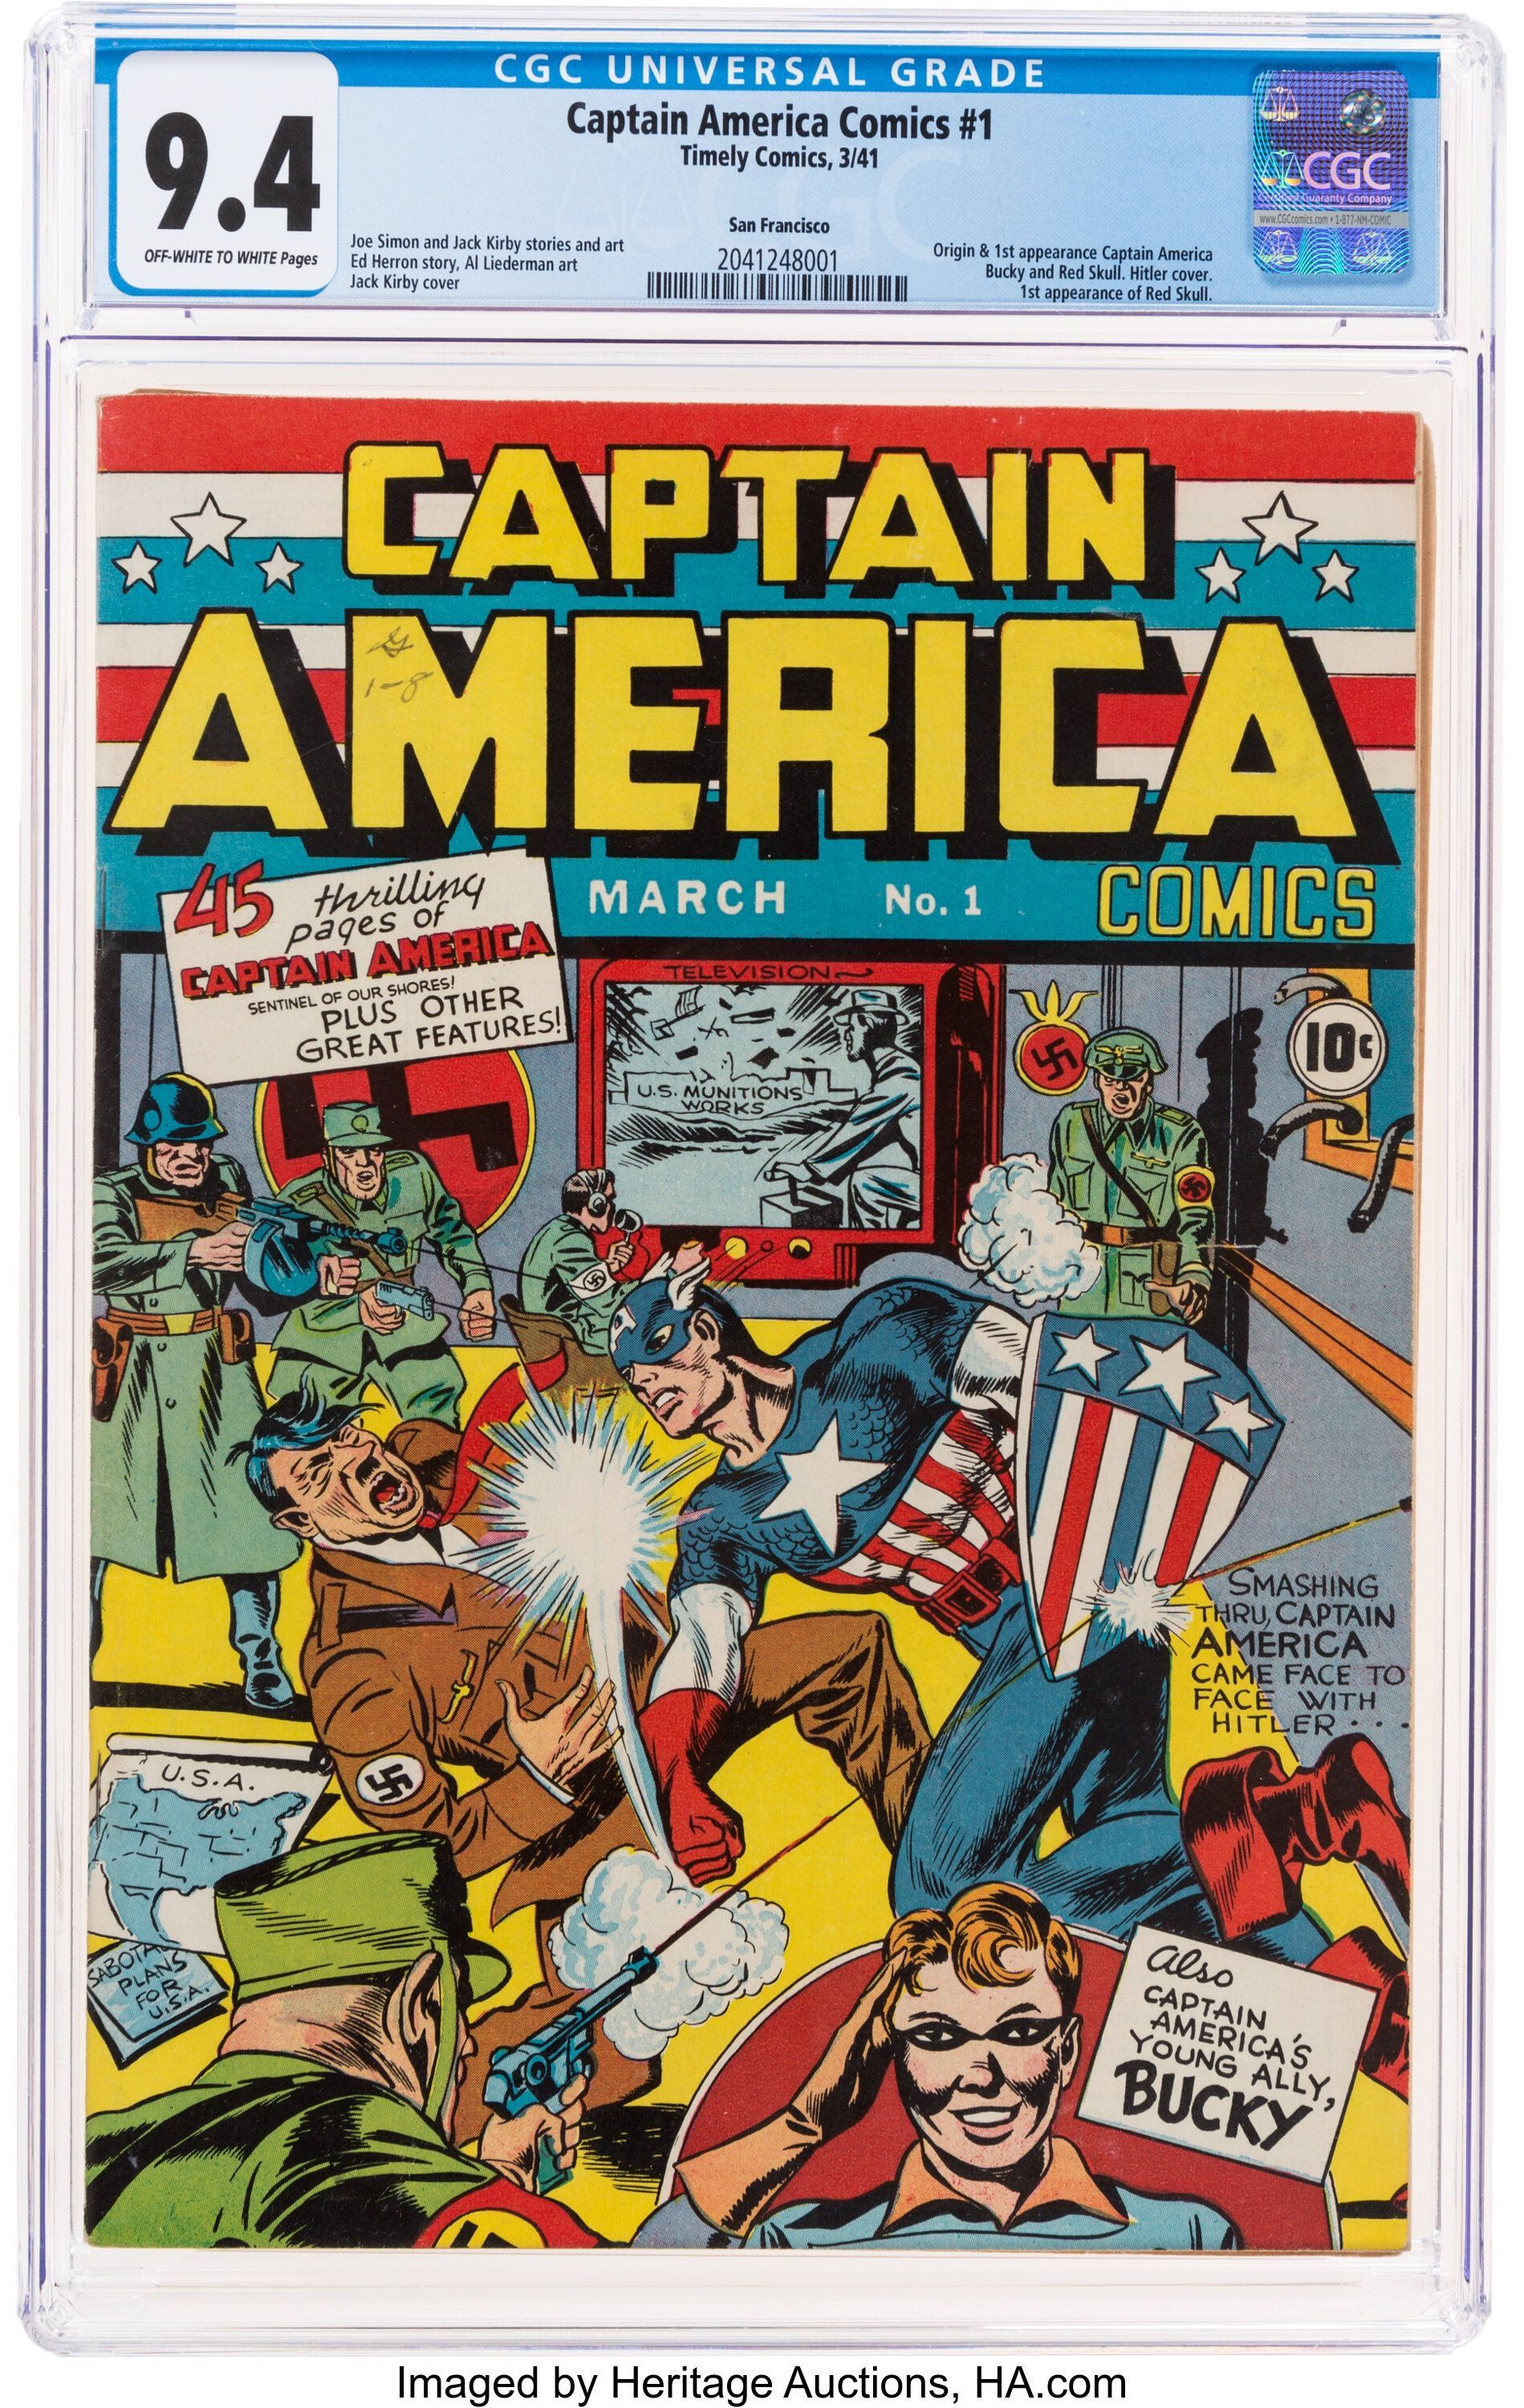 First Captain America Comic Sells For Over $3 Million Following a Bidding War